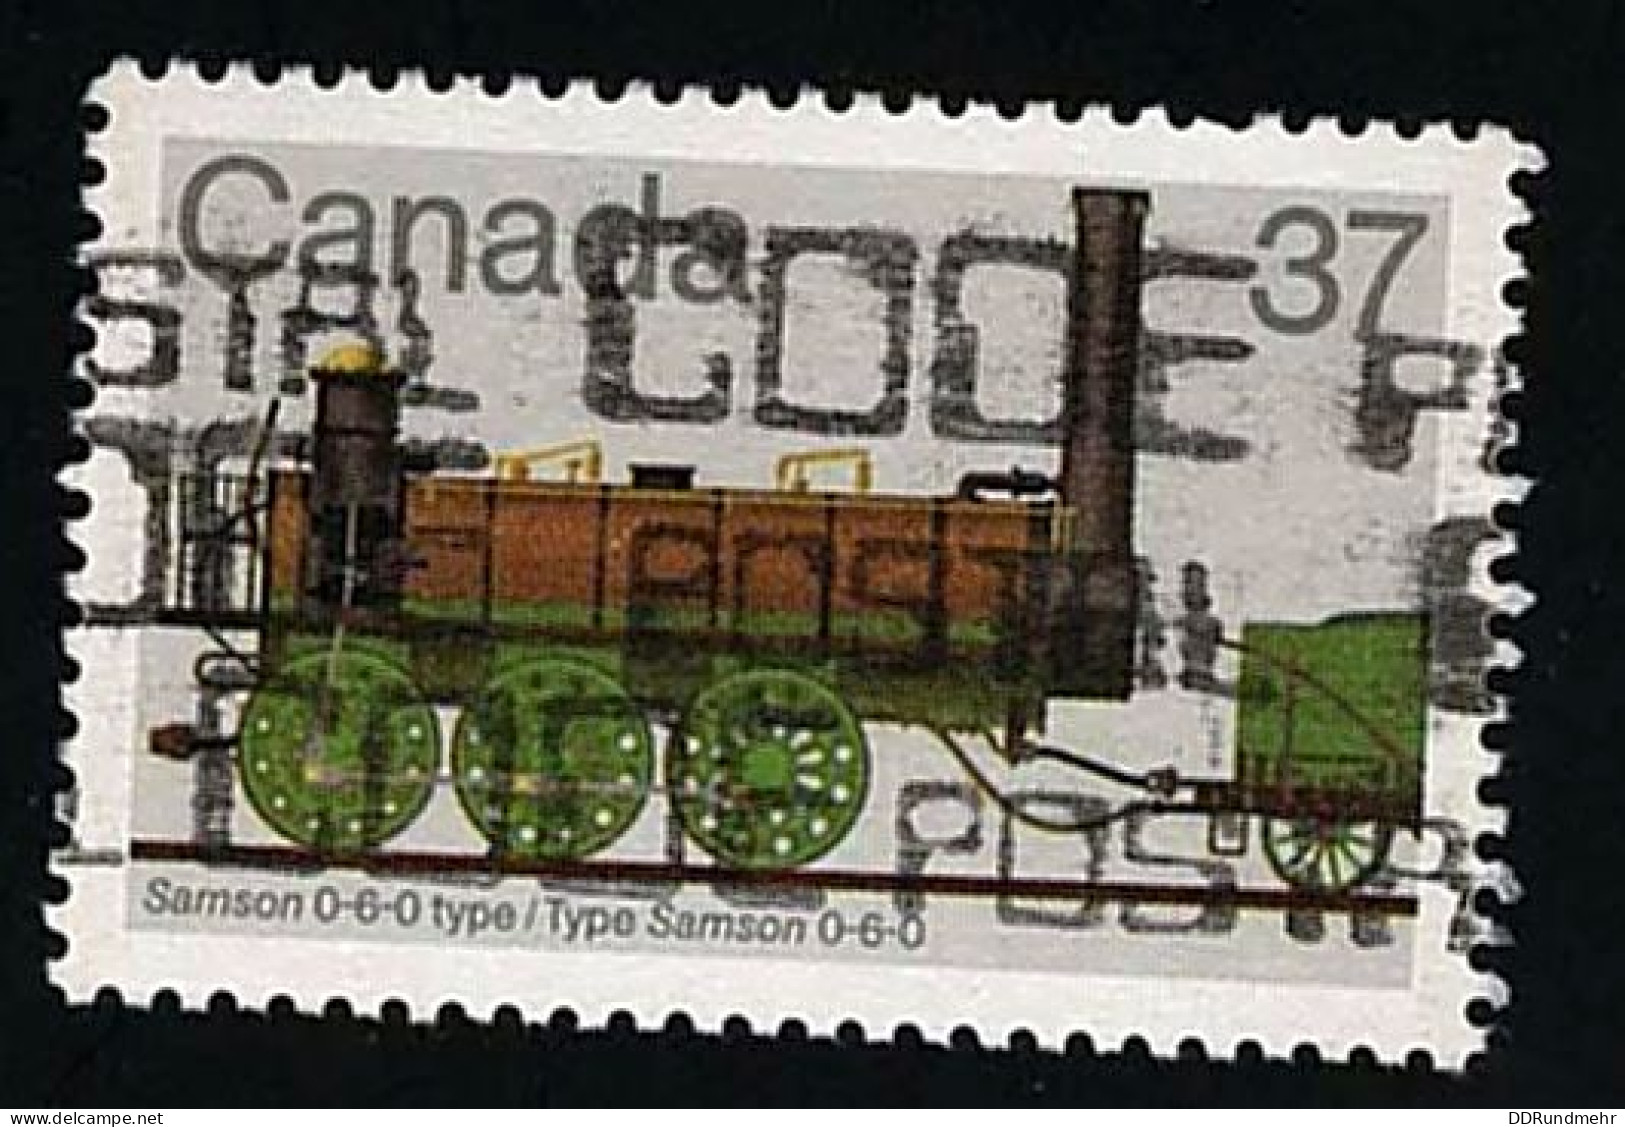 1983 Locomotives  Michel CA 895 Stamp Number CA 1001 Yvert Et Tellier CA 859 Stanley Gibbons CA 1108 Used - Used Stamps